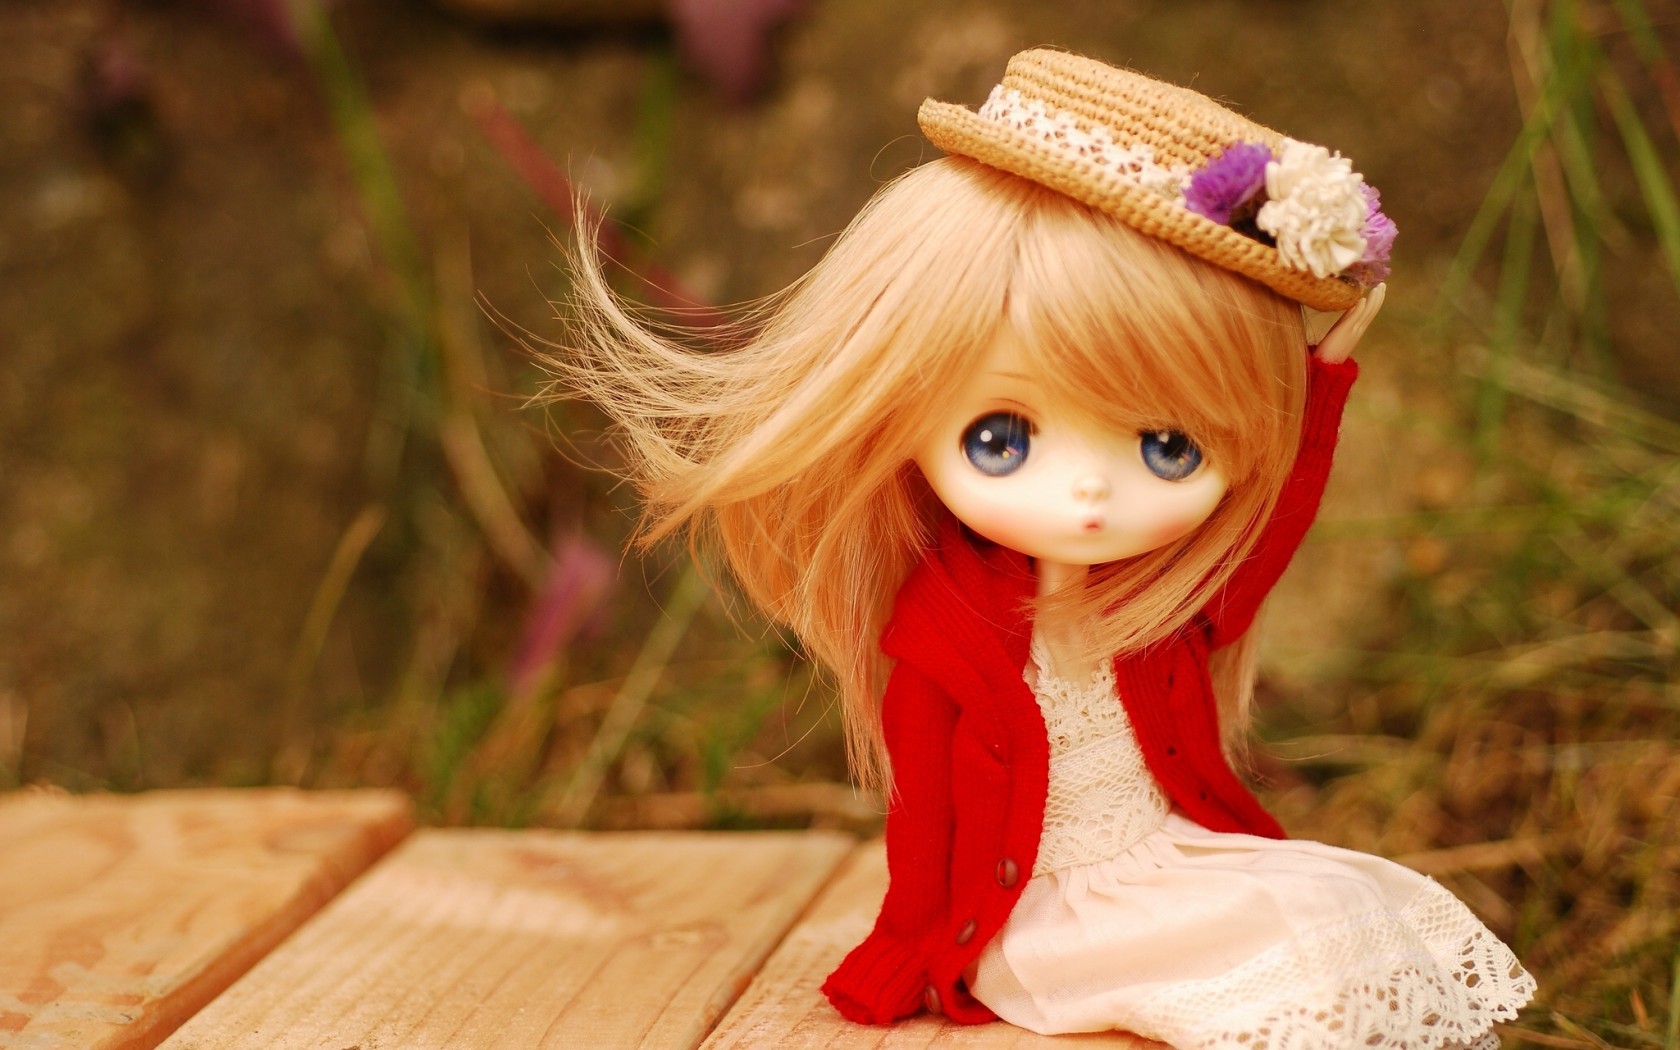 Beautiful Stylish Doll Hq Wallpaper - Cute Barbie Doll Wallpapers For Mobile - HD Wallpaper 